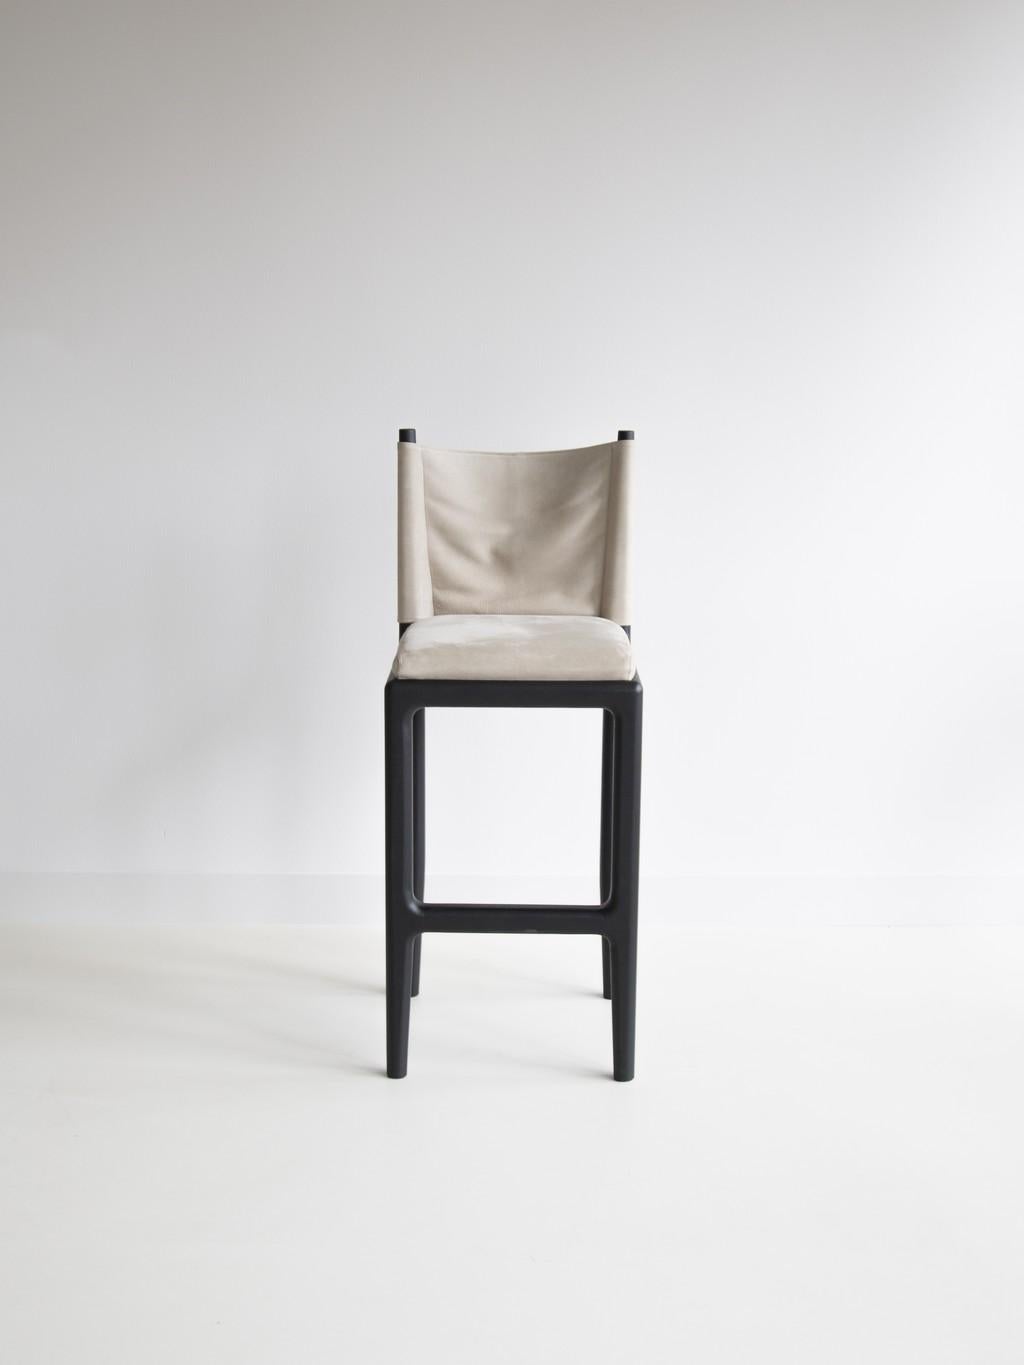 Abi Barstool by Van Rossum
Dimensions: D 45 x W 45 x H 115 cm
Materials: Upholstery, Leather, Wood.
Also available in different materials. Please contact us.

For over 40 years, Van Rossum has designed and handmade solid and sustainable furniture